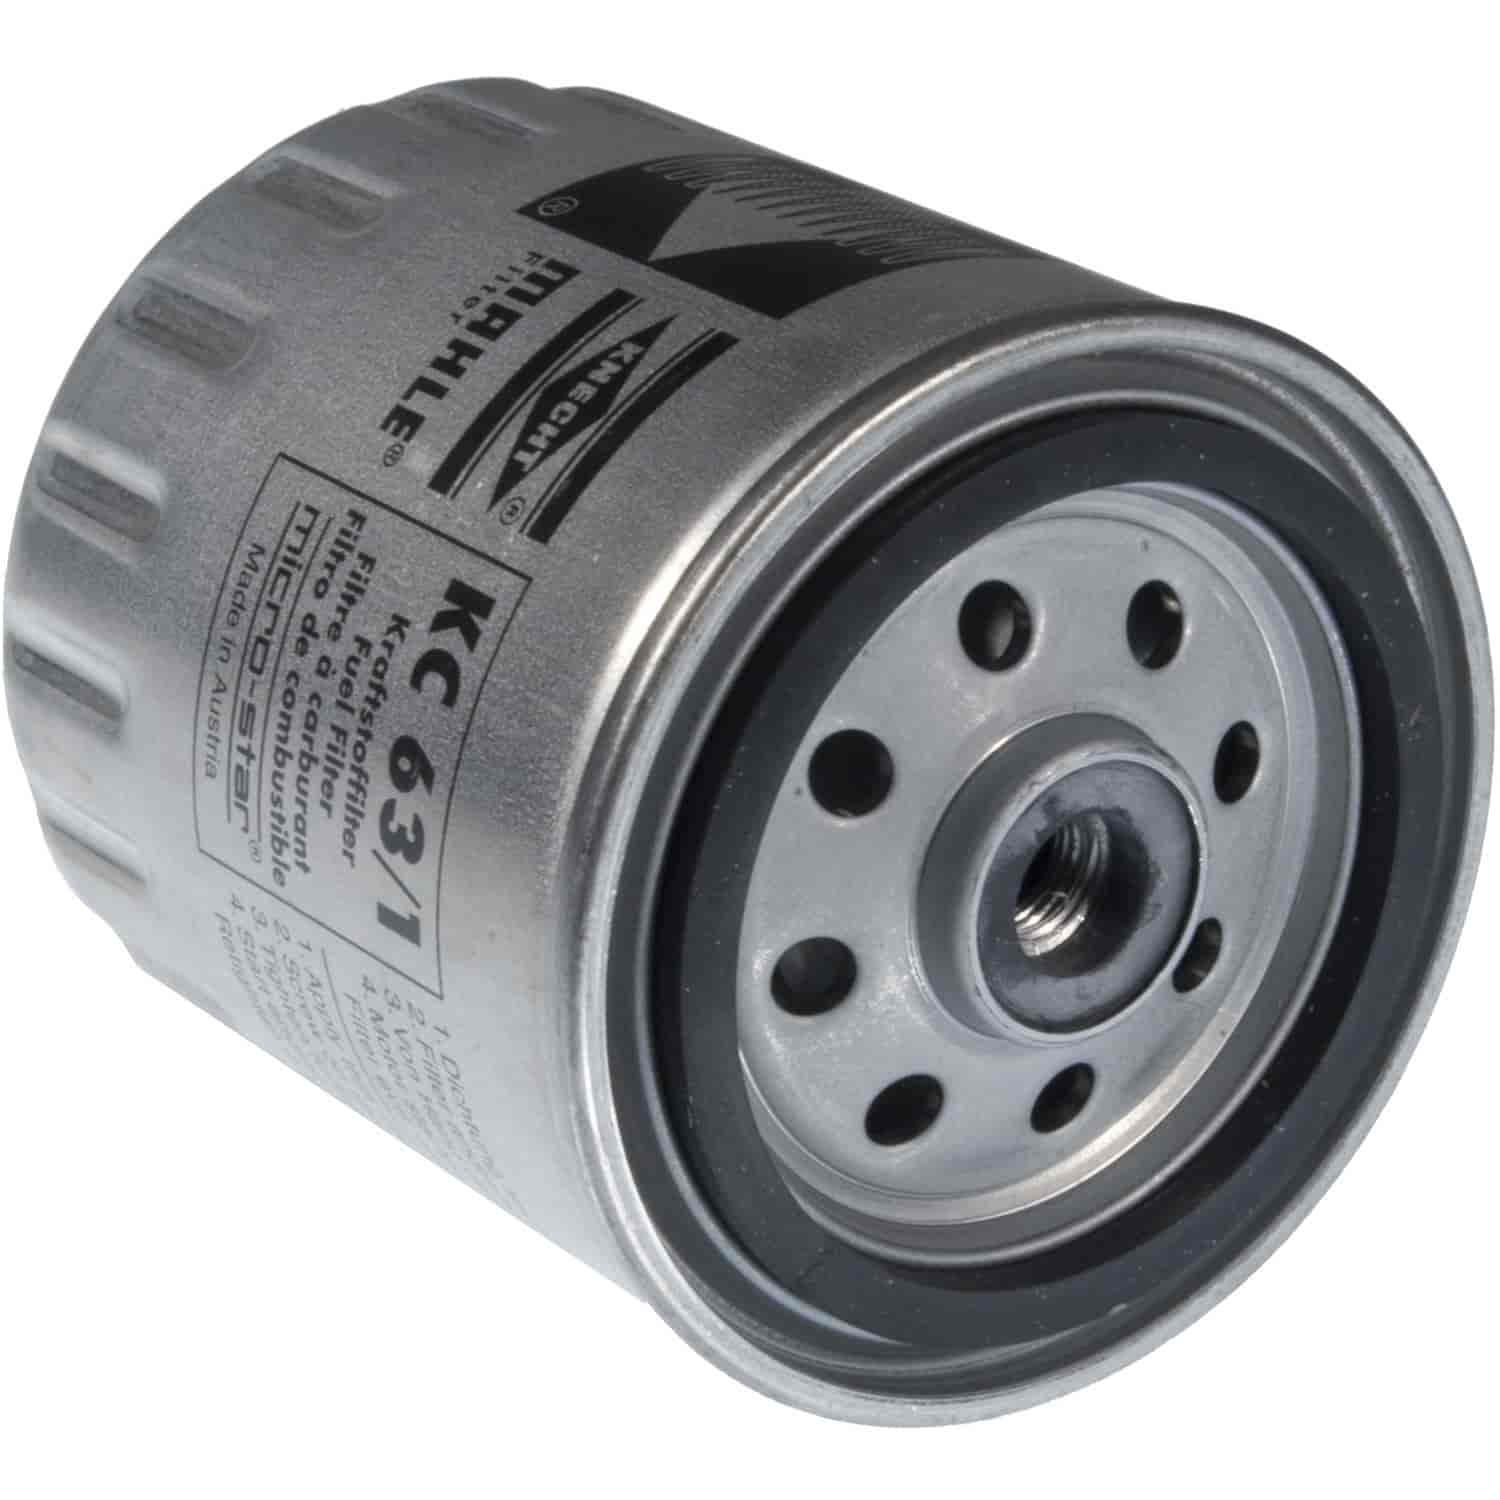 Mahle Fuel Filter Mercedes 190 300 350 SERIES E Class and S class 84-99